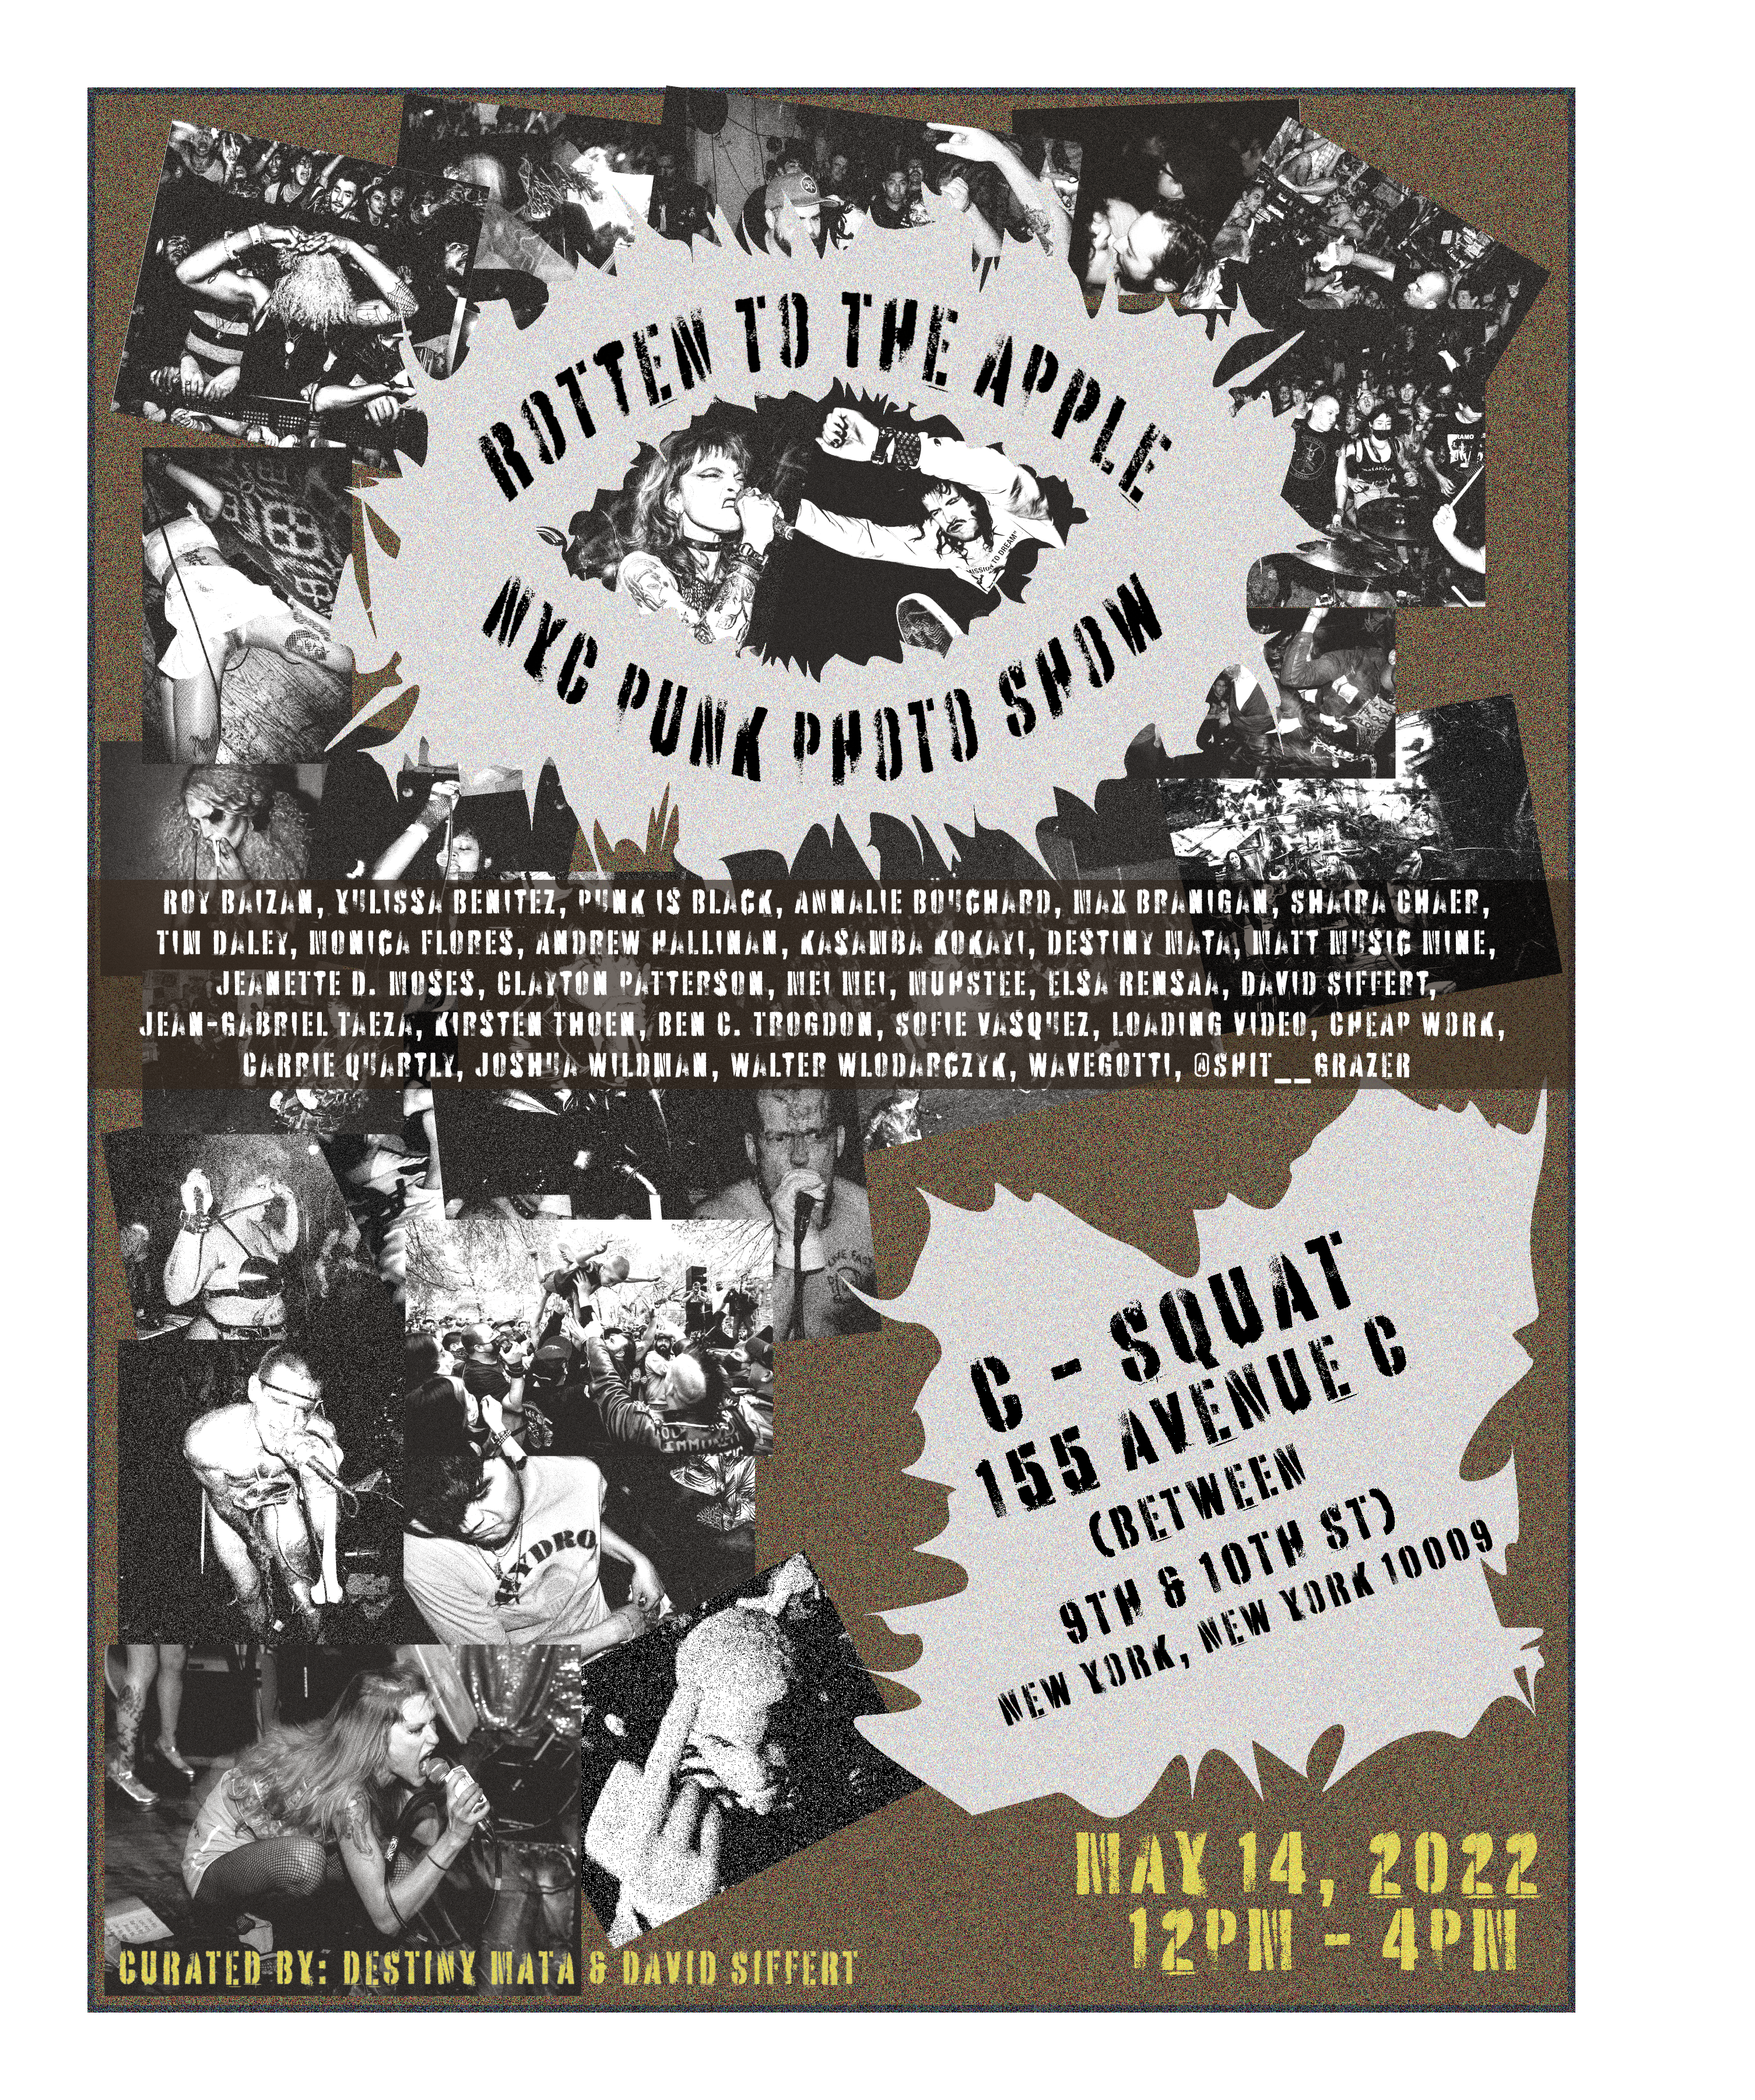 NYC PUNK PHOTO SHOW FLYER